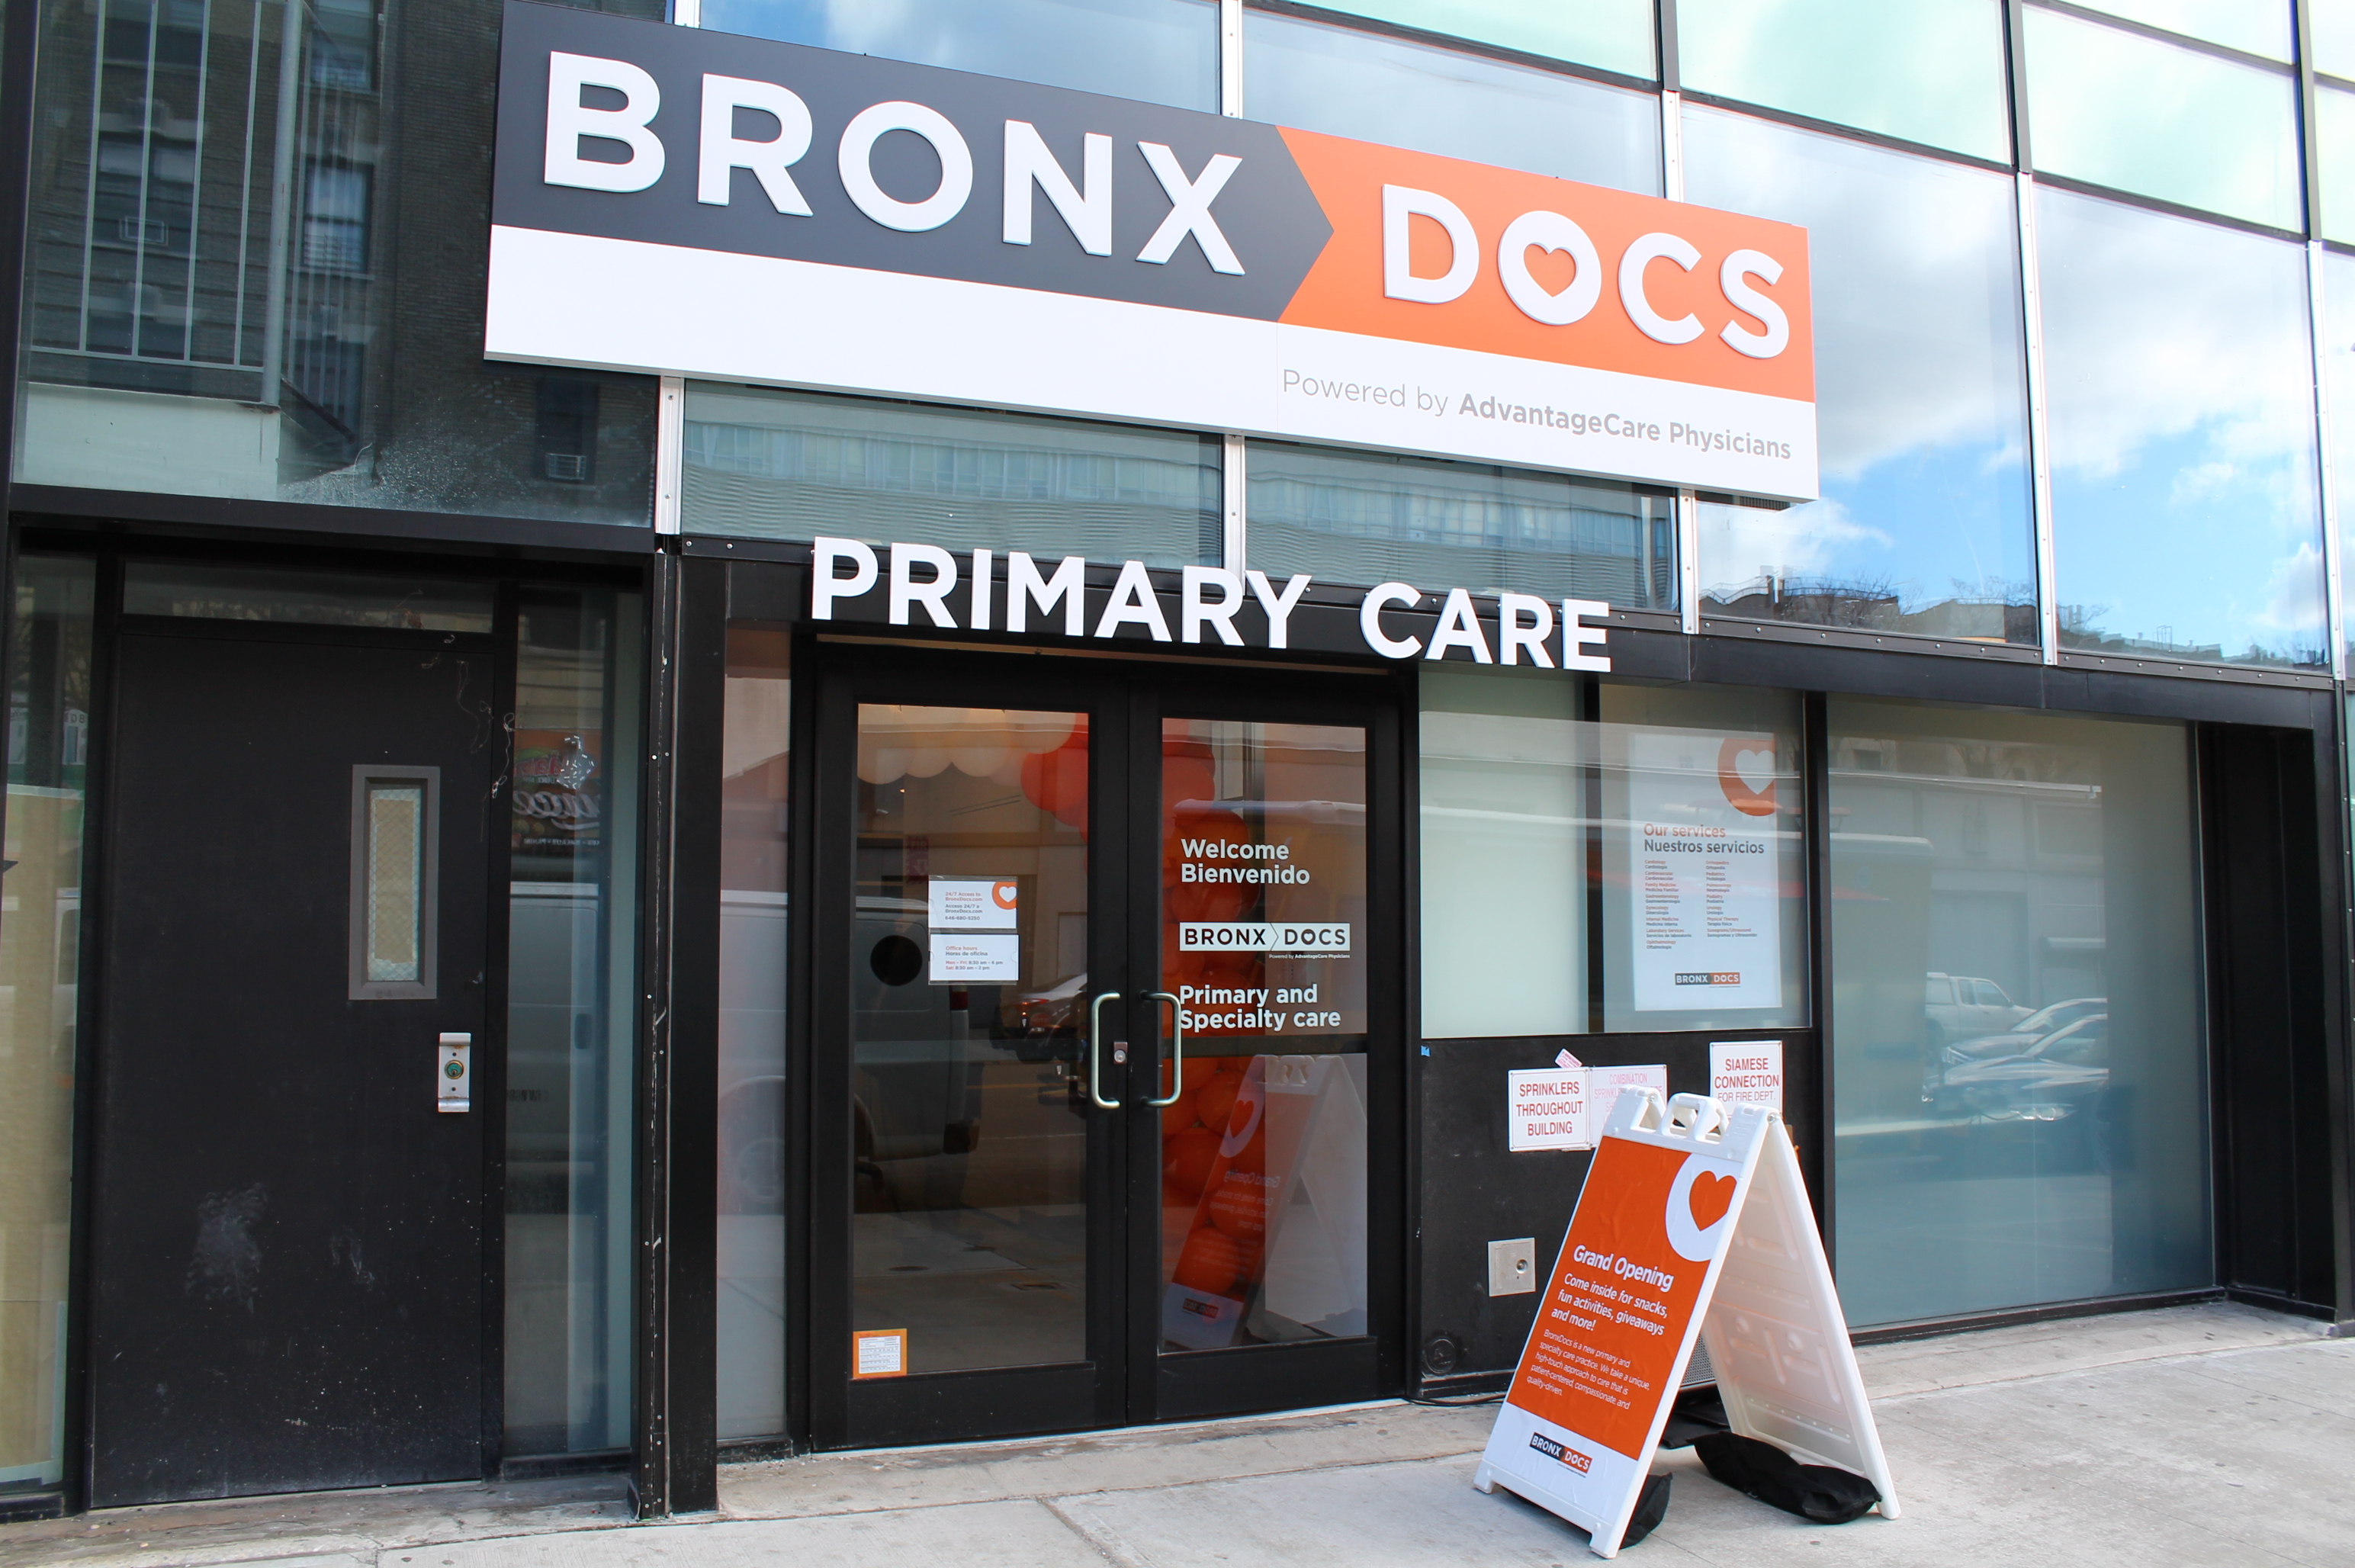 EmblemHealth Family Of Companies Announces Affiliation With BronxDocs Primary & Specialty Care